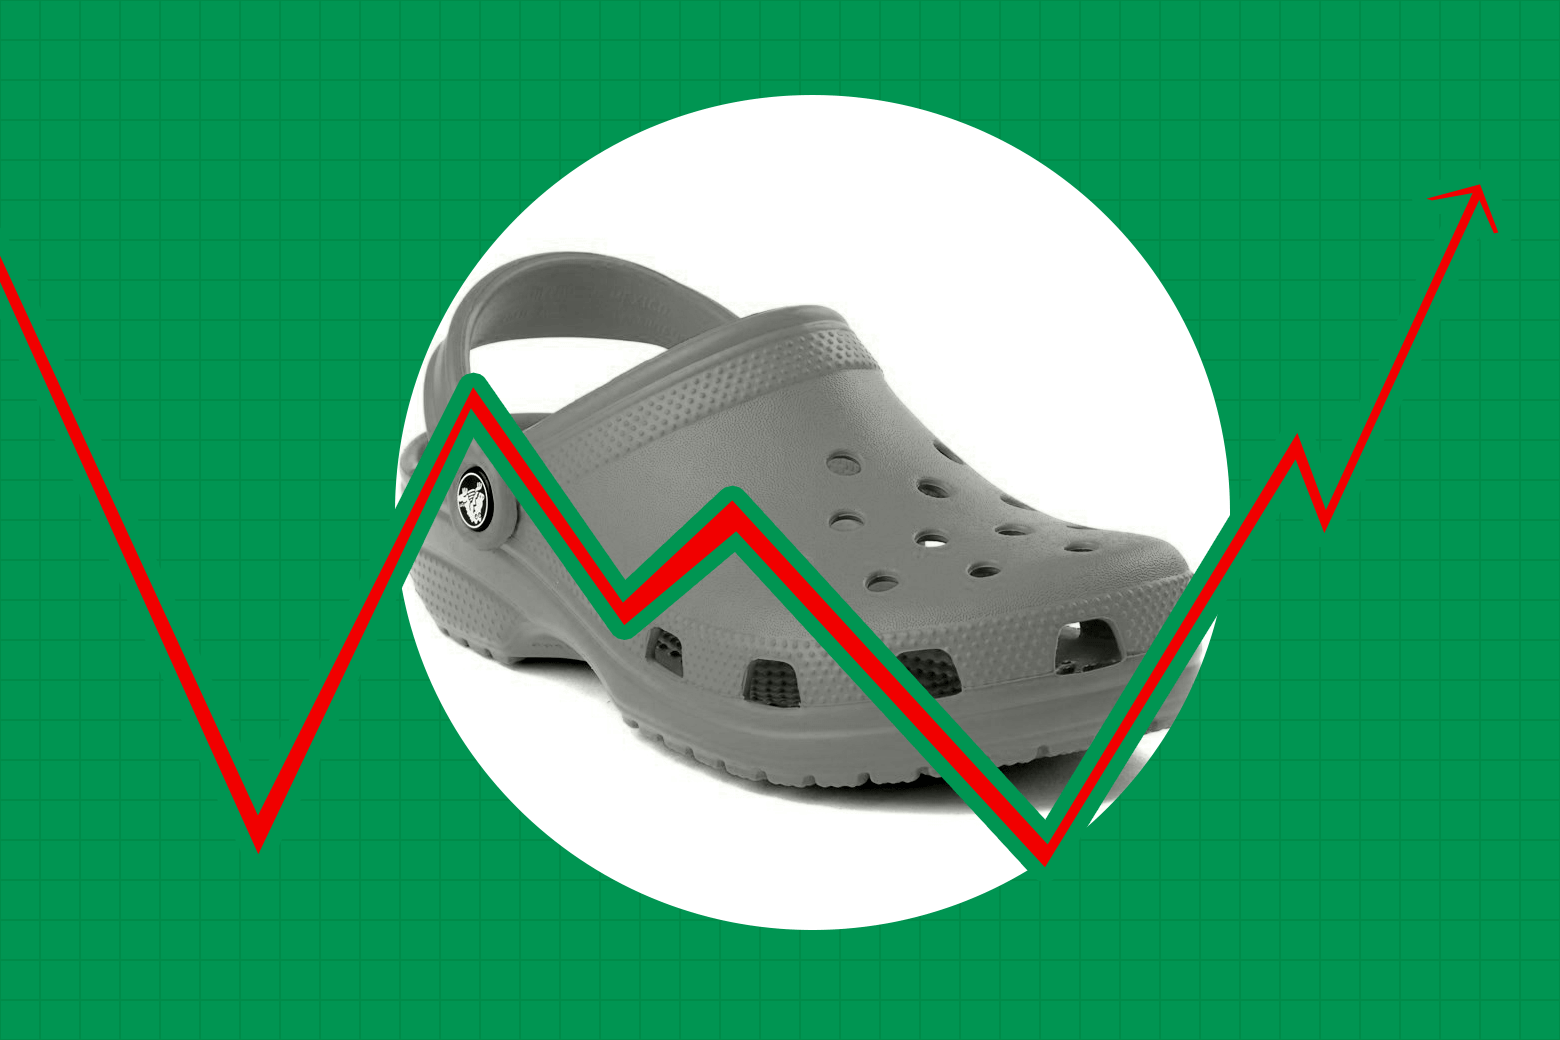 is the crocs company going out of business